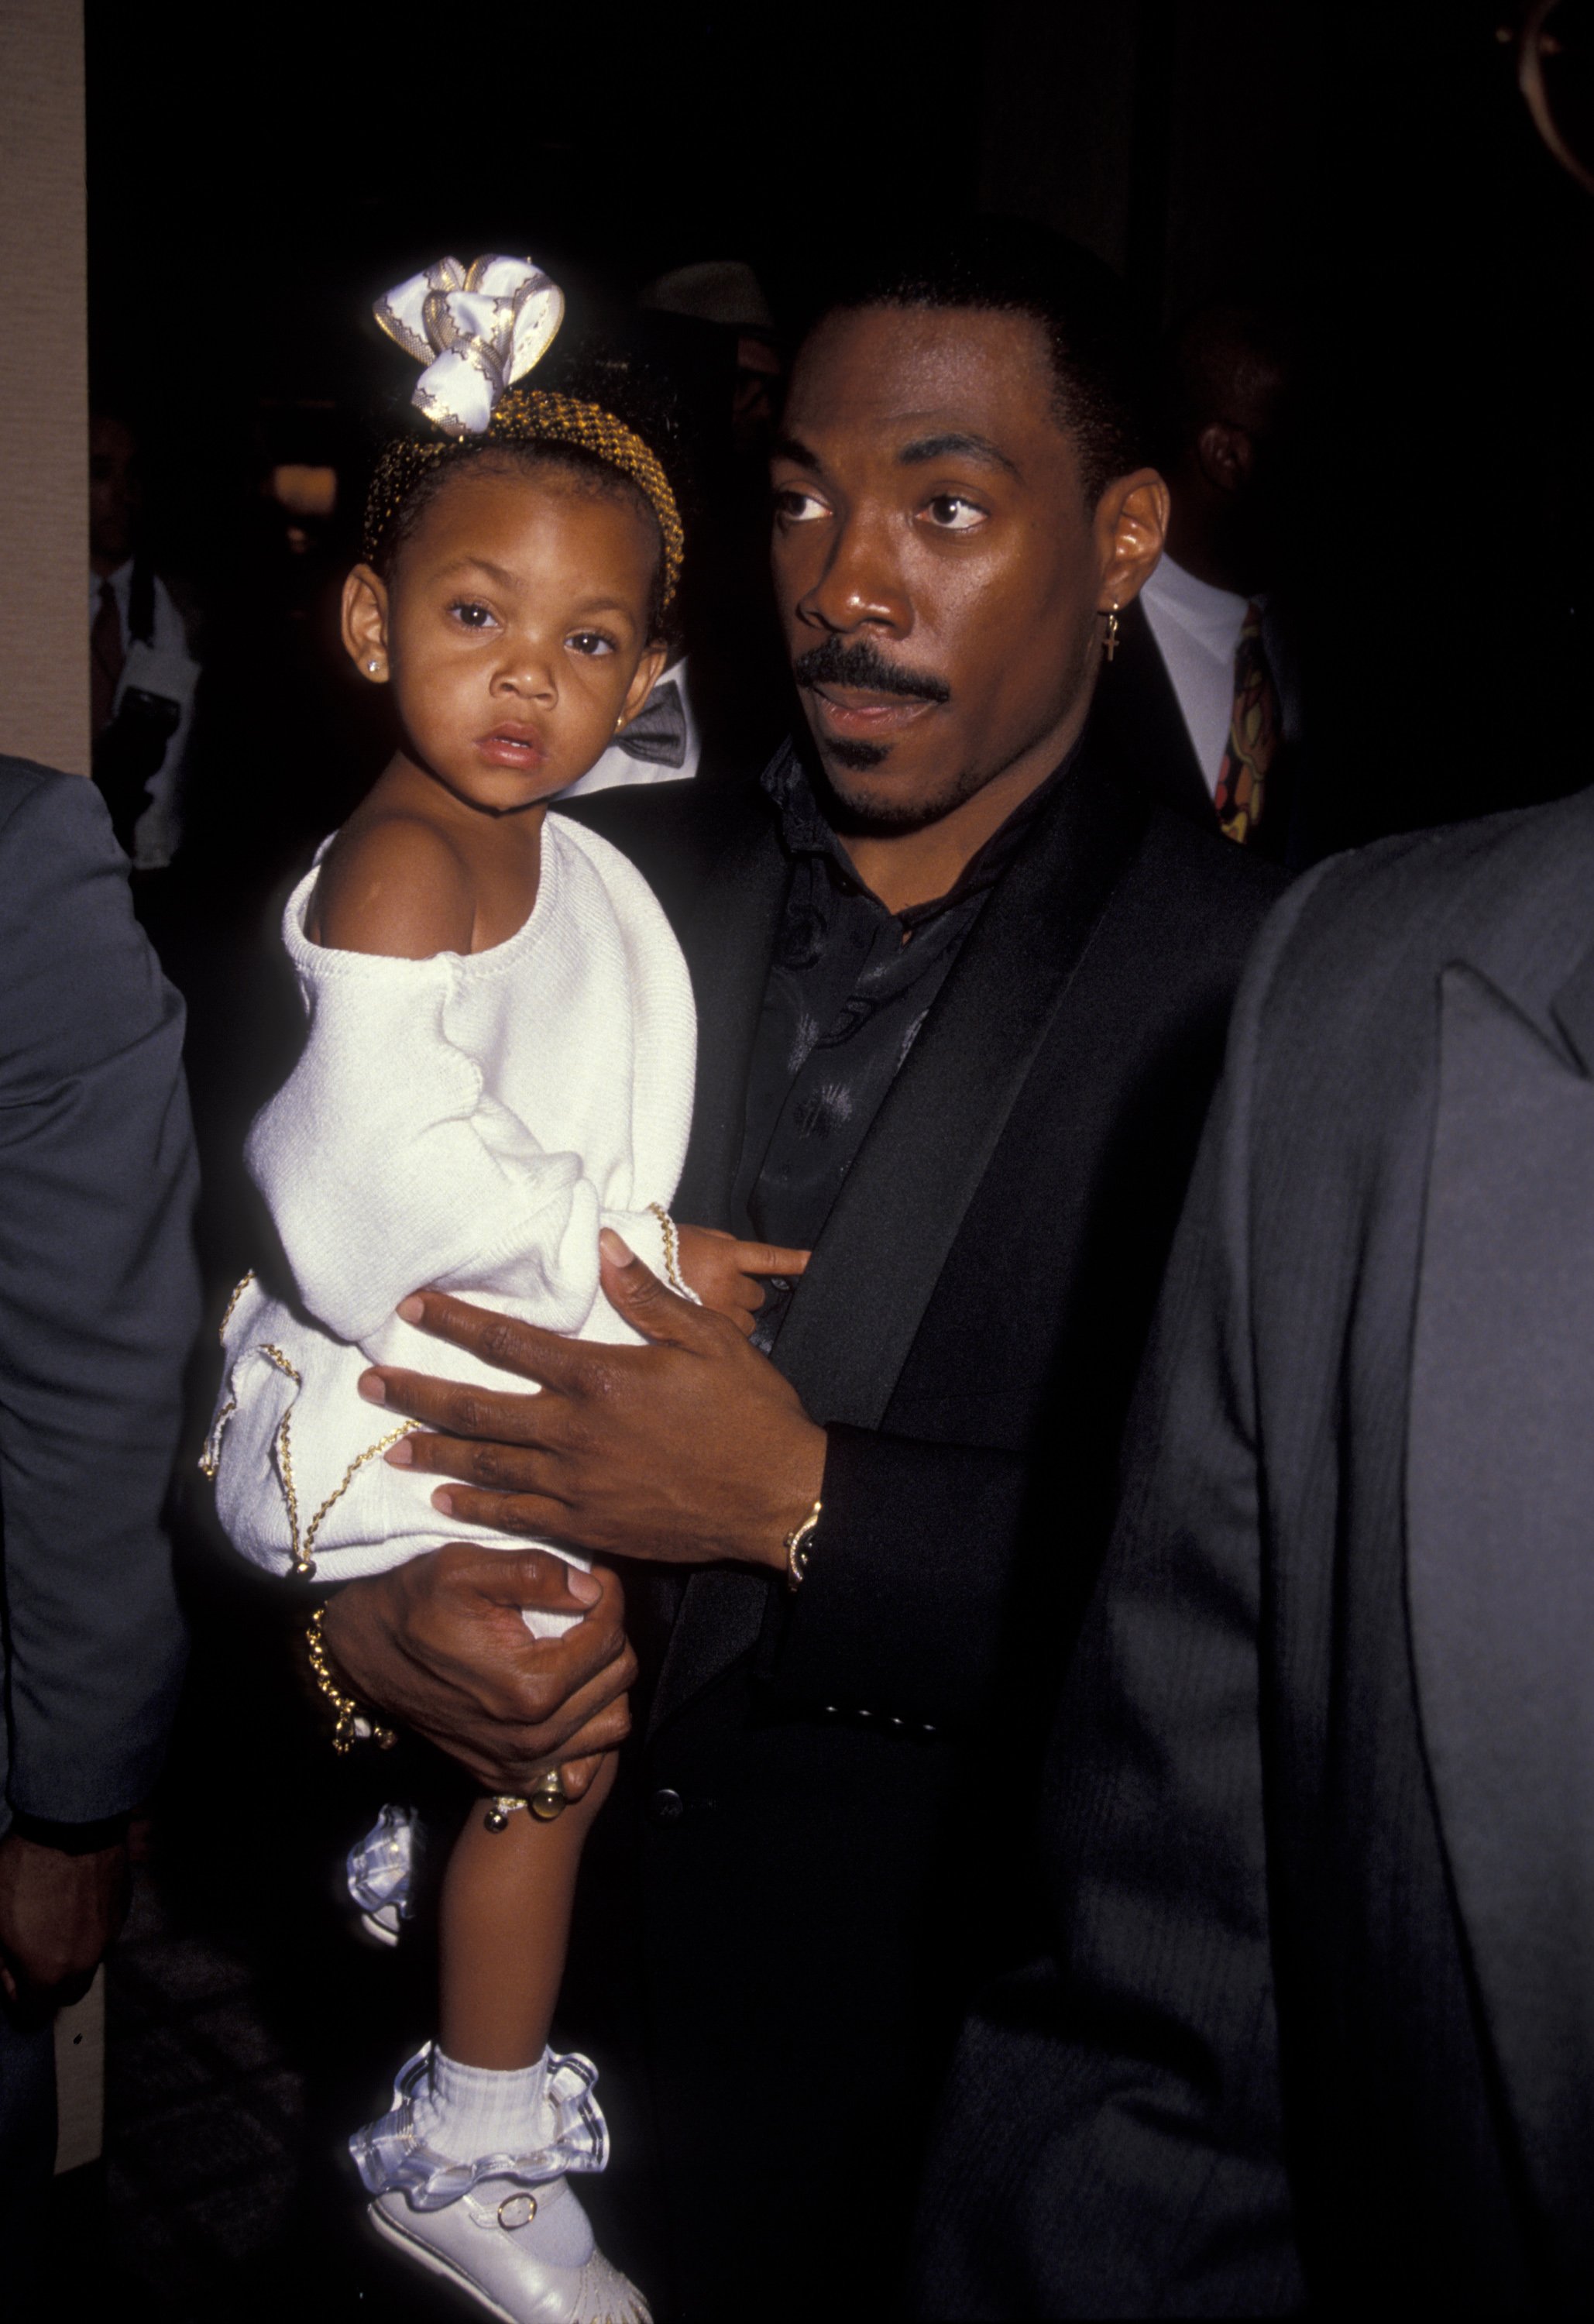 Eddie Murphy and his daughter Bria Murphy during his NAACP Salute in Los Angeles, California, on July 19, 1991. | Source: Getty Images